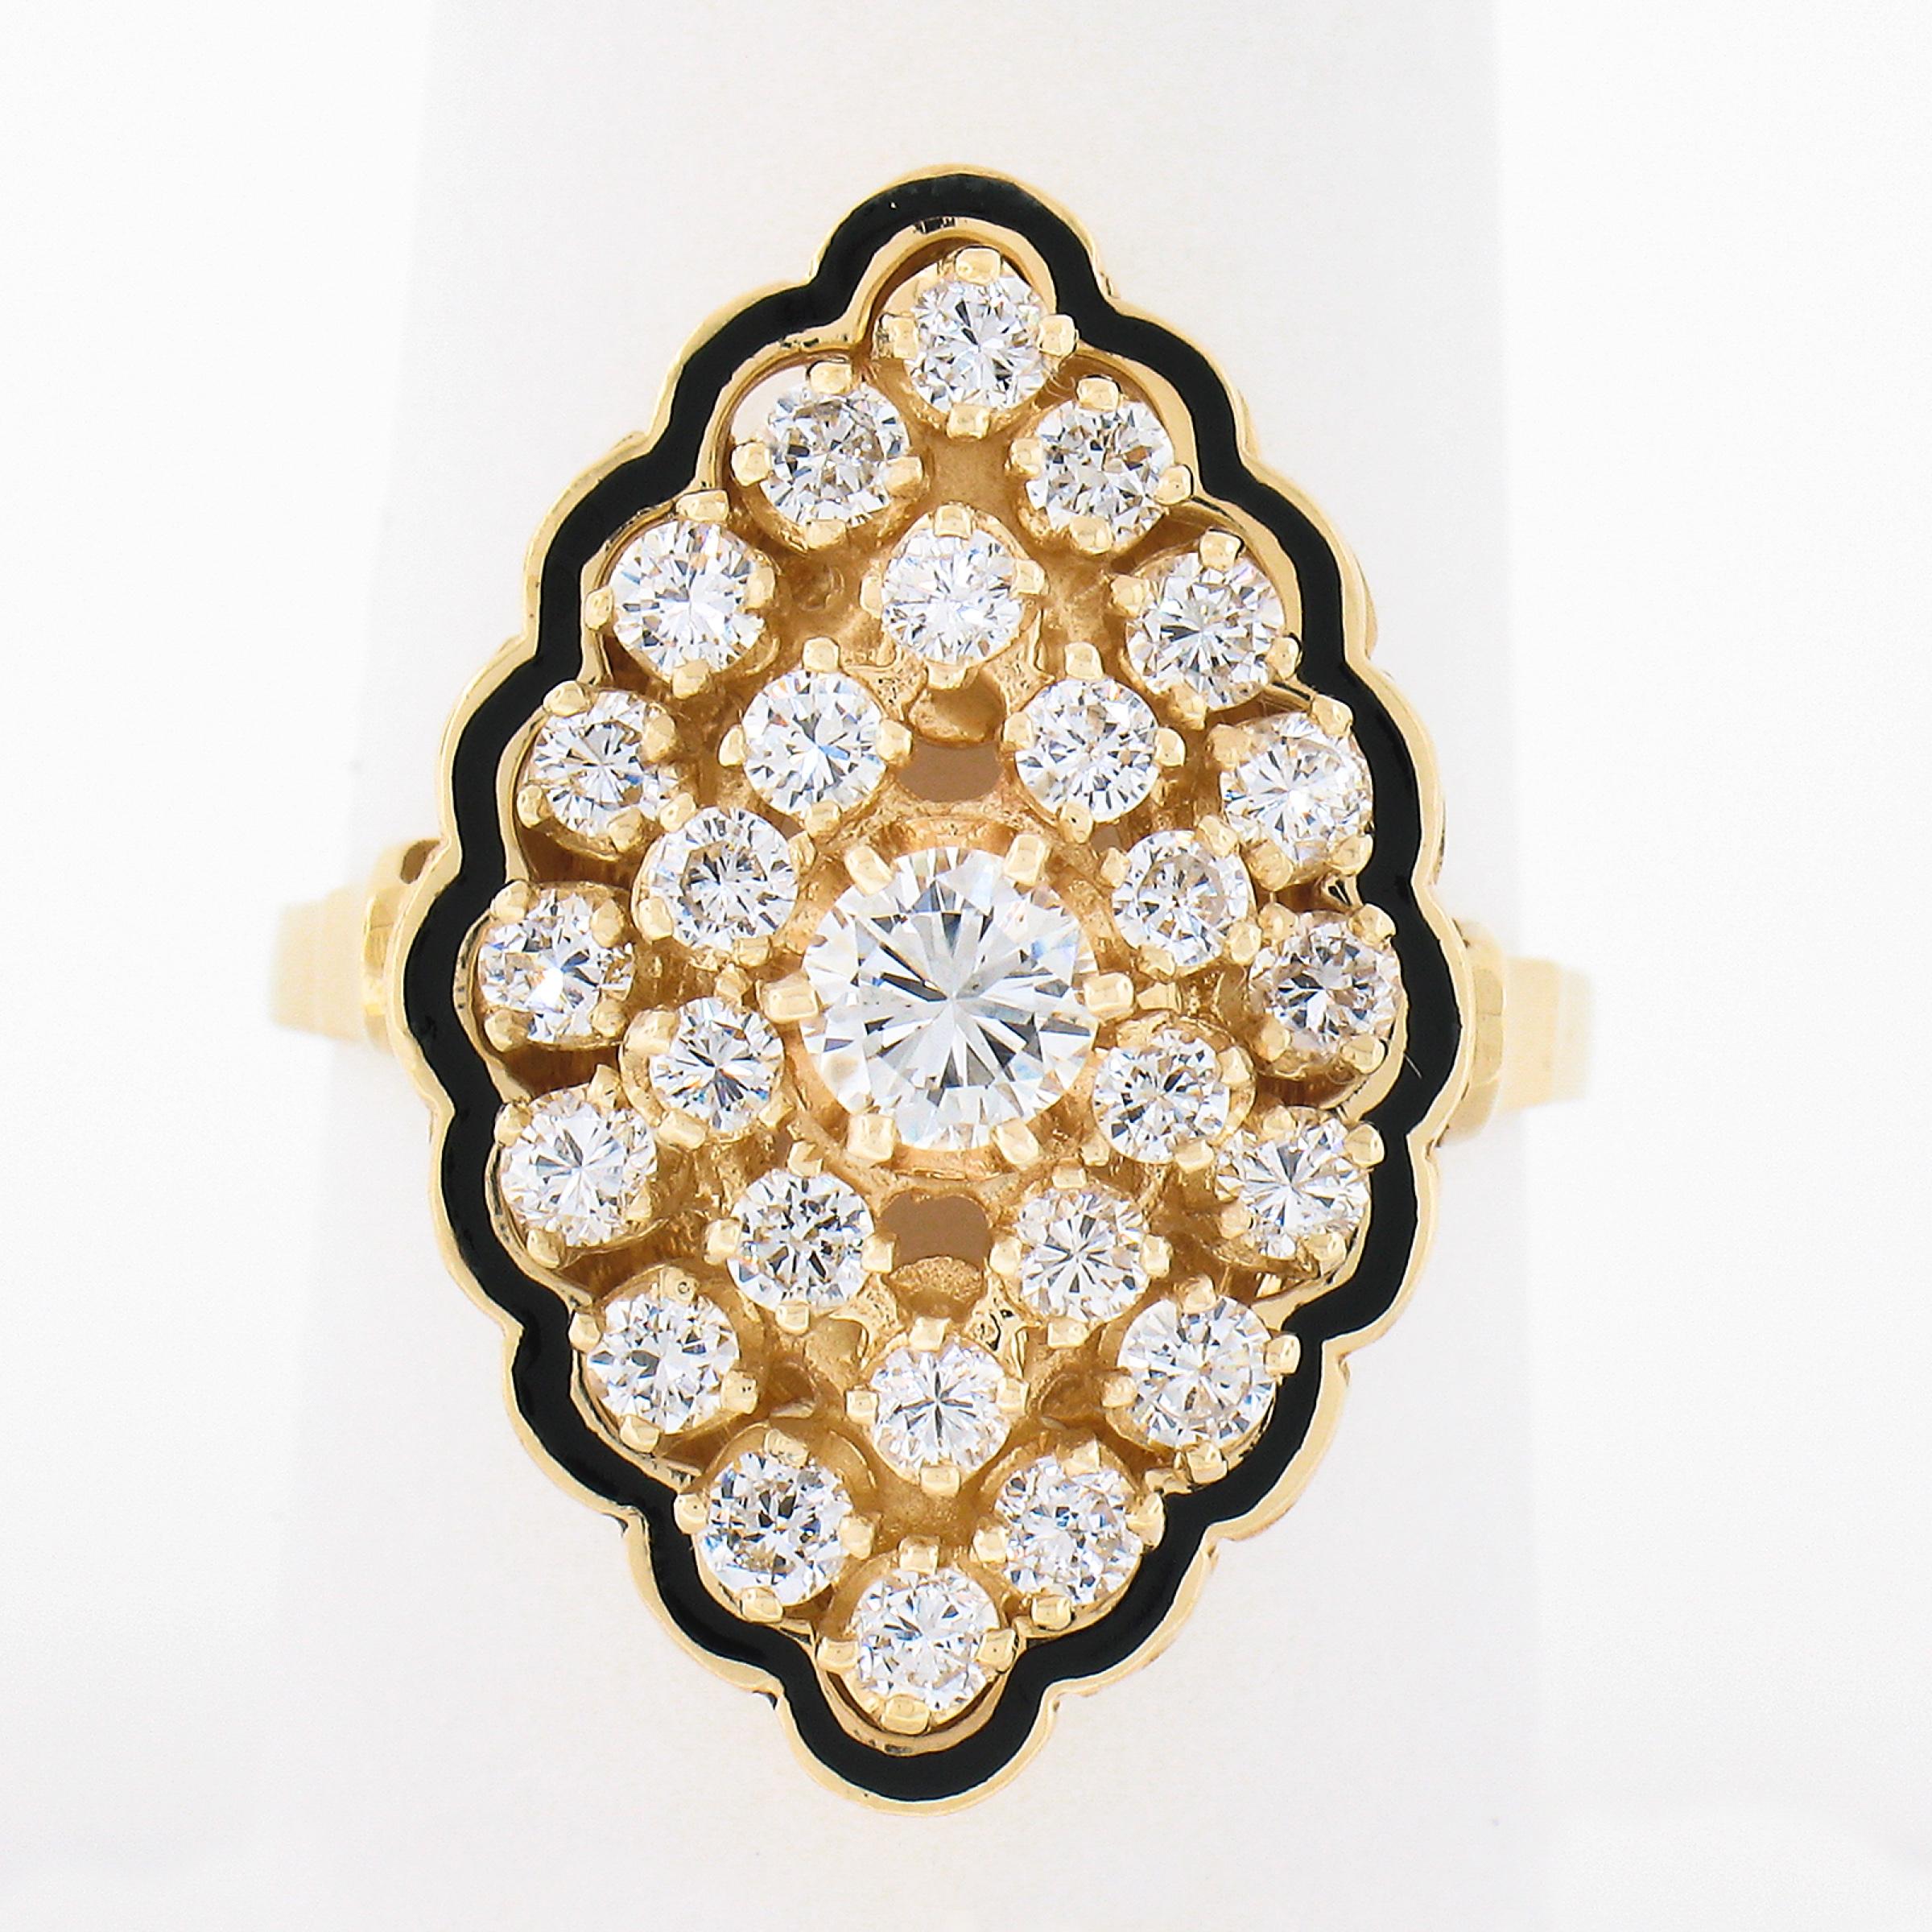 This absolutely stunning vintage diamond cocktail ring is crafted in solid 14k yellow gold and features a beautiful marquise shaped navette design, drenched throughout with approximaltey 1.12 carats of very fine quality round brilliant diamonds that